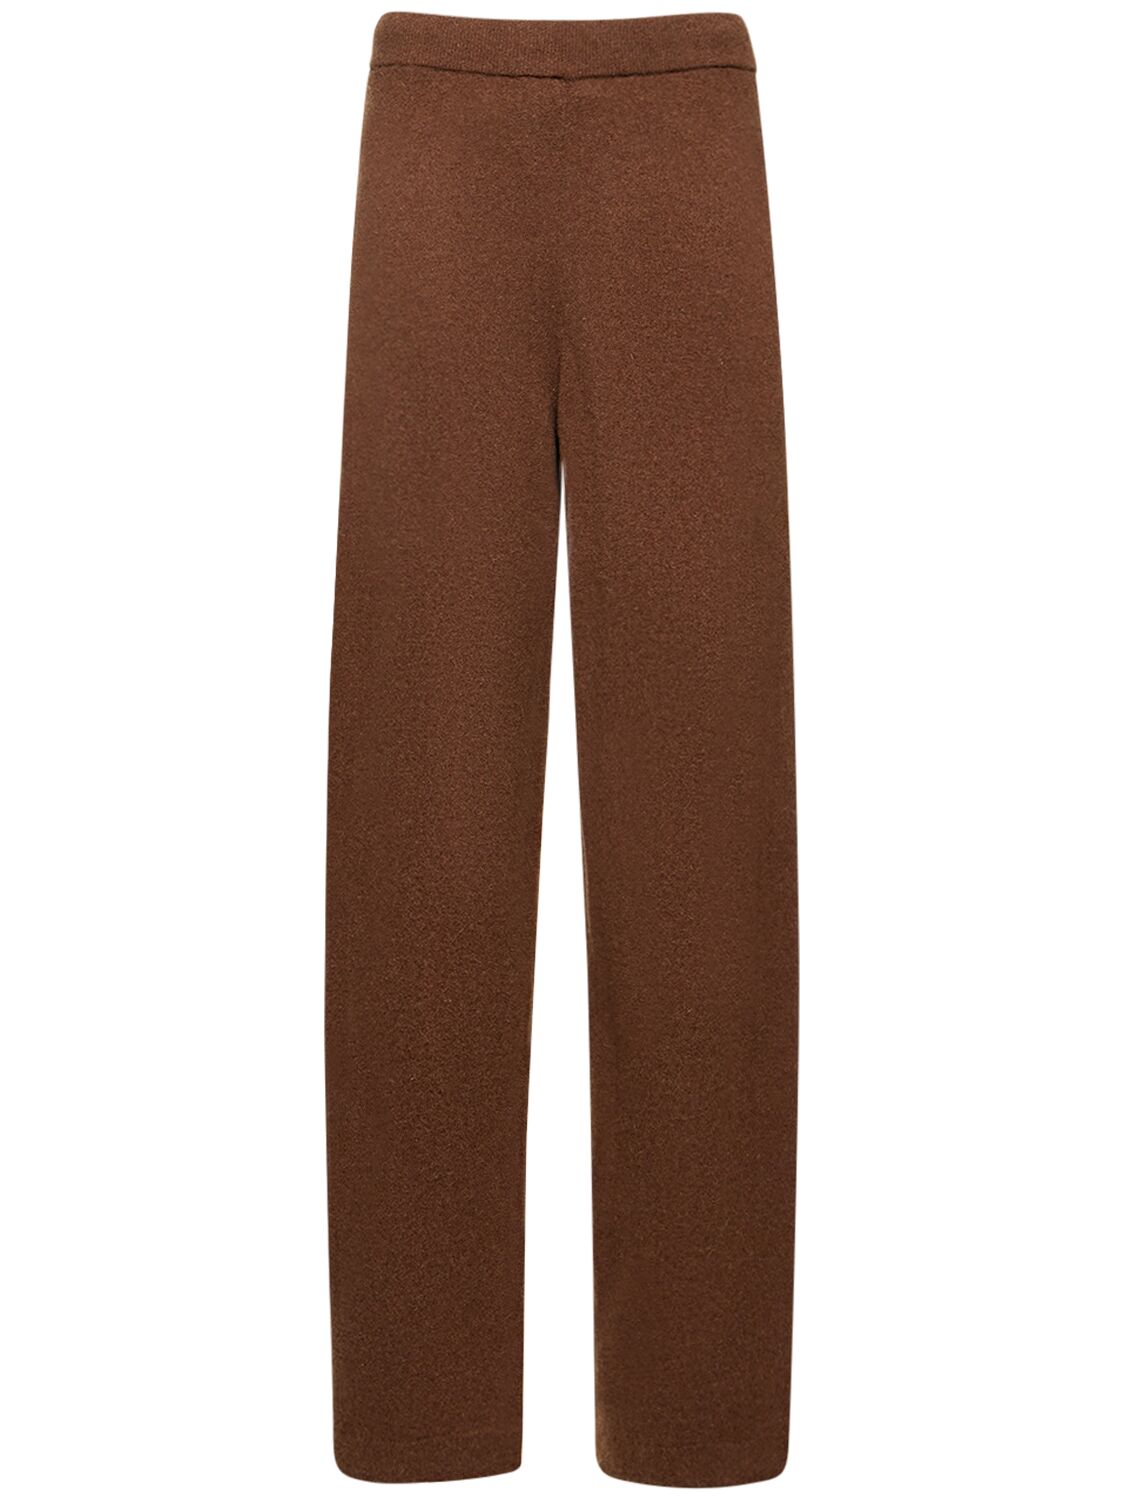 Image of Soft Wool Blend Curved Pants